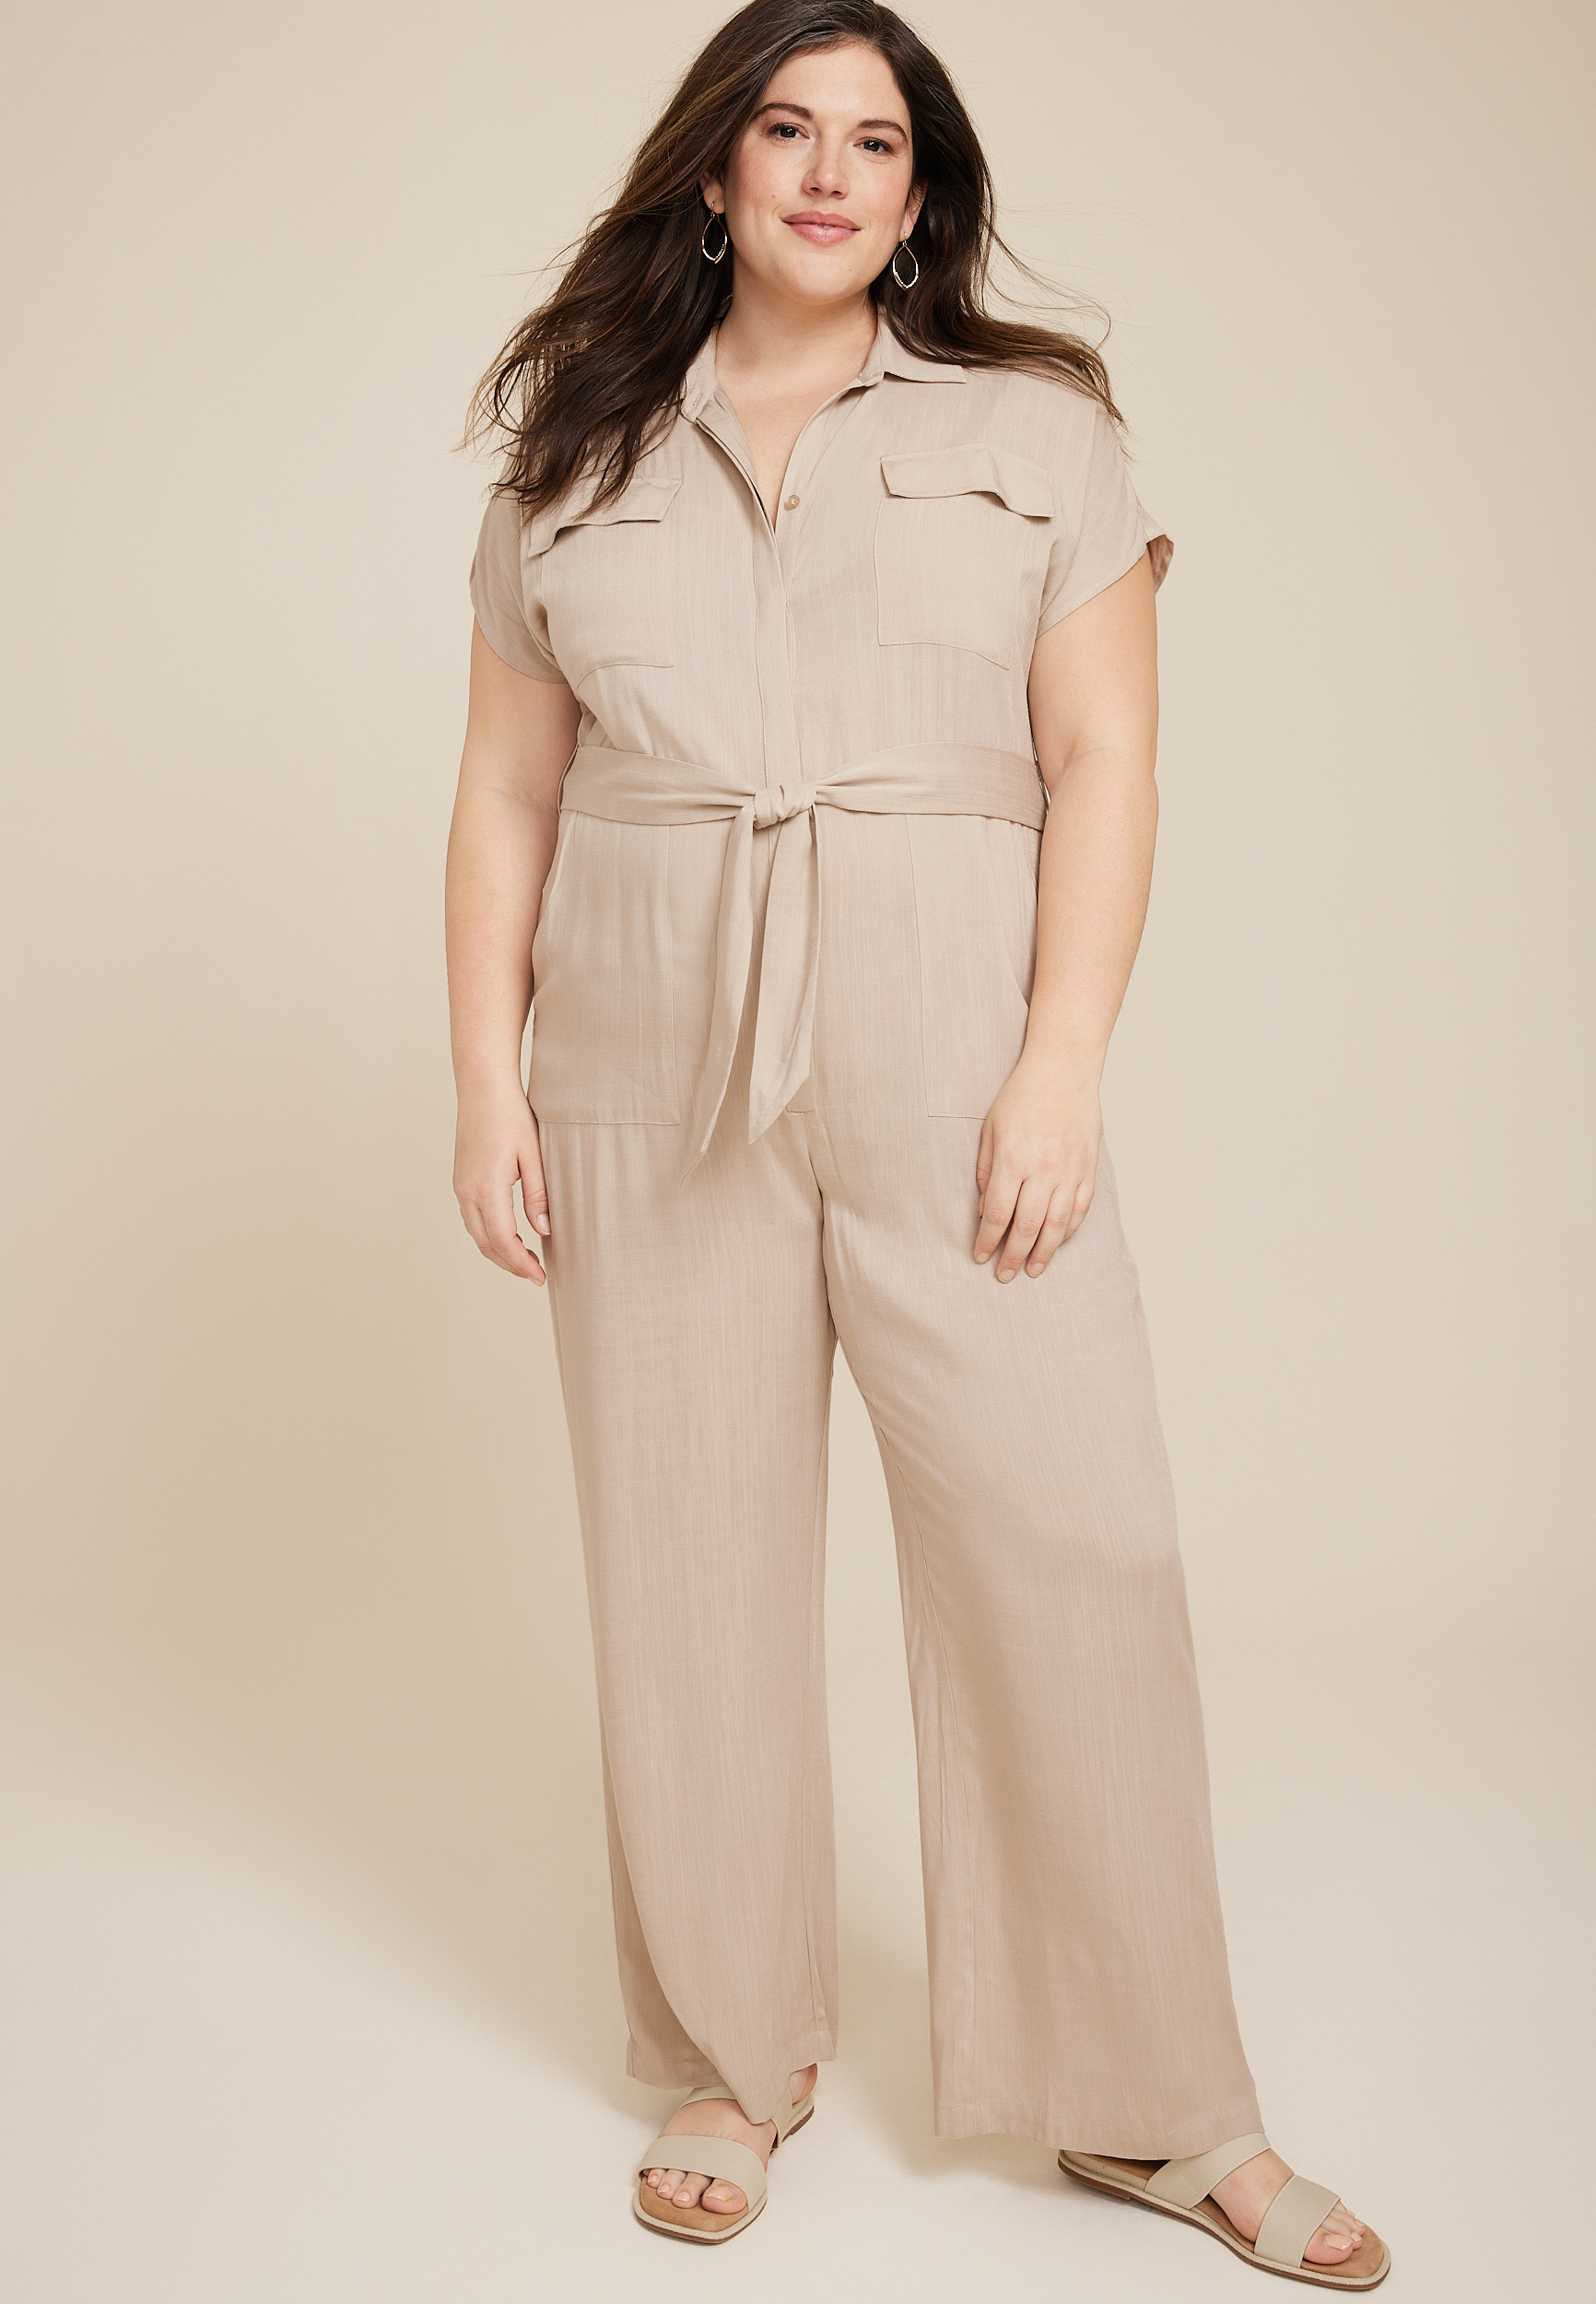 New Arrival Plus Size Clothing For Women: Tops, Pants & More